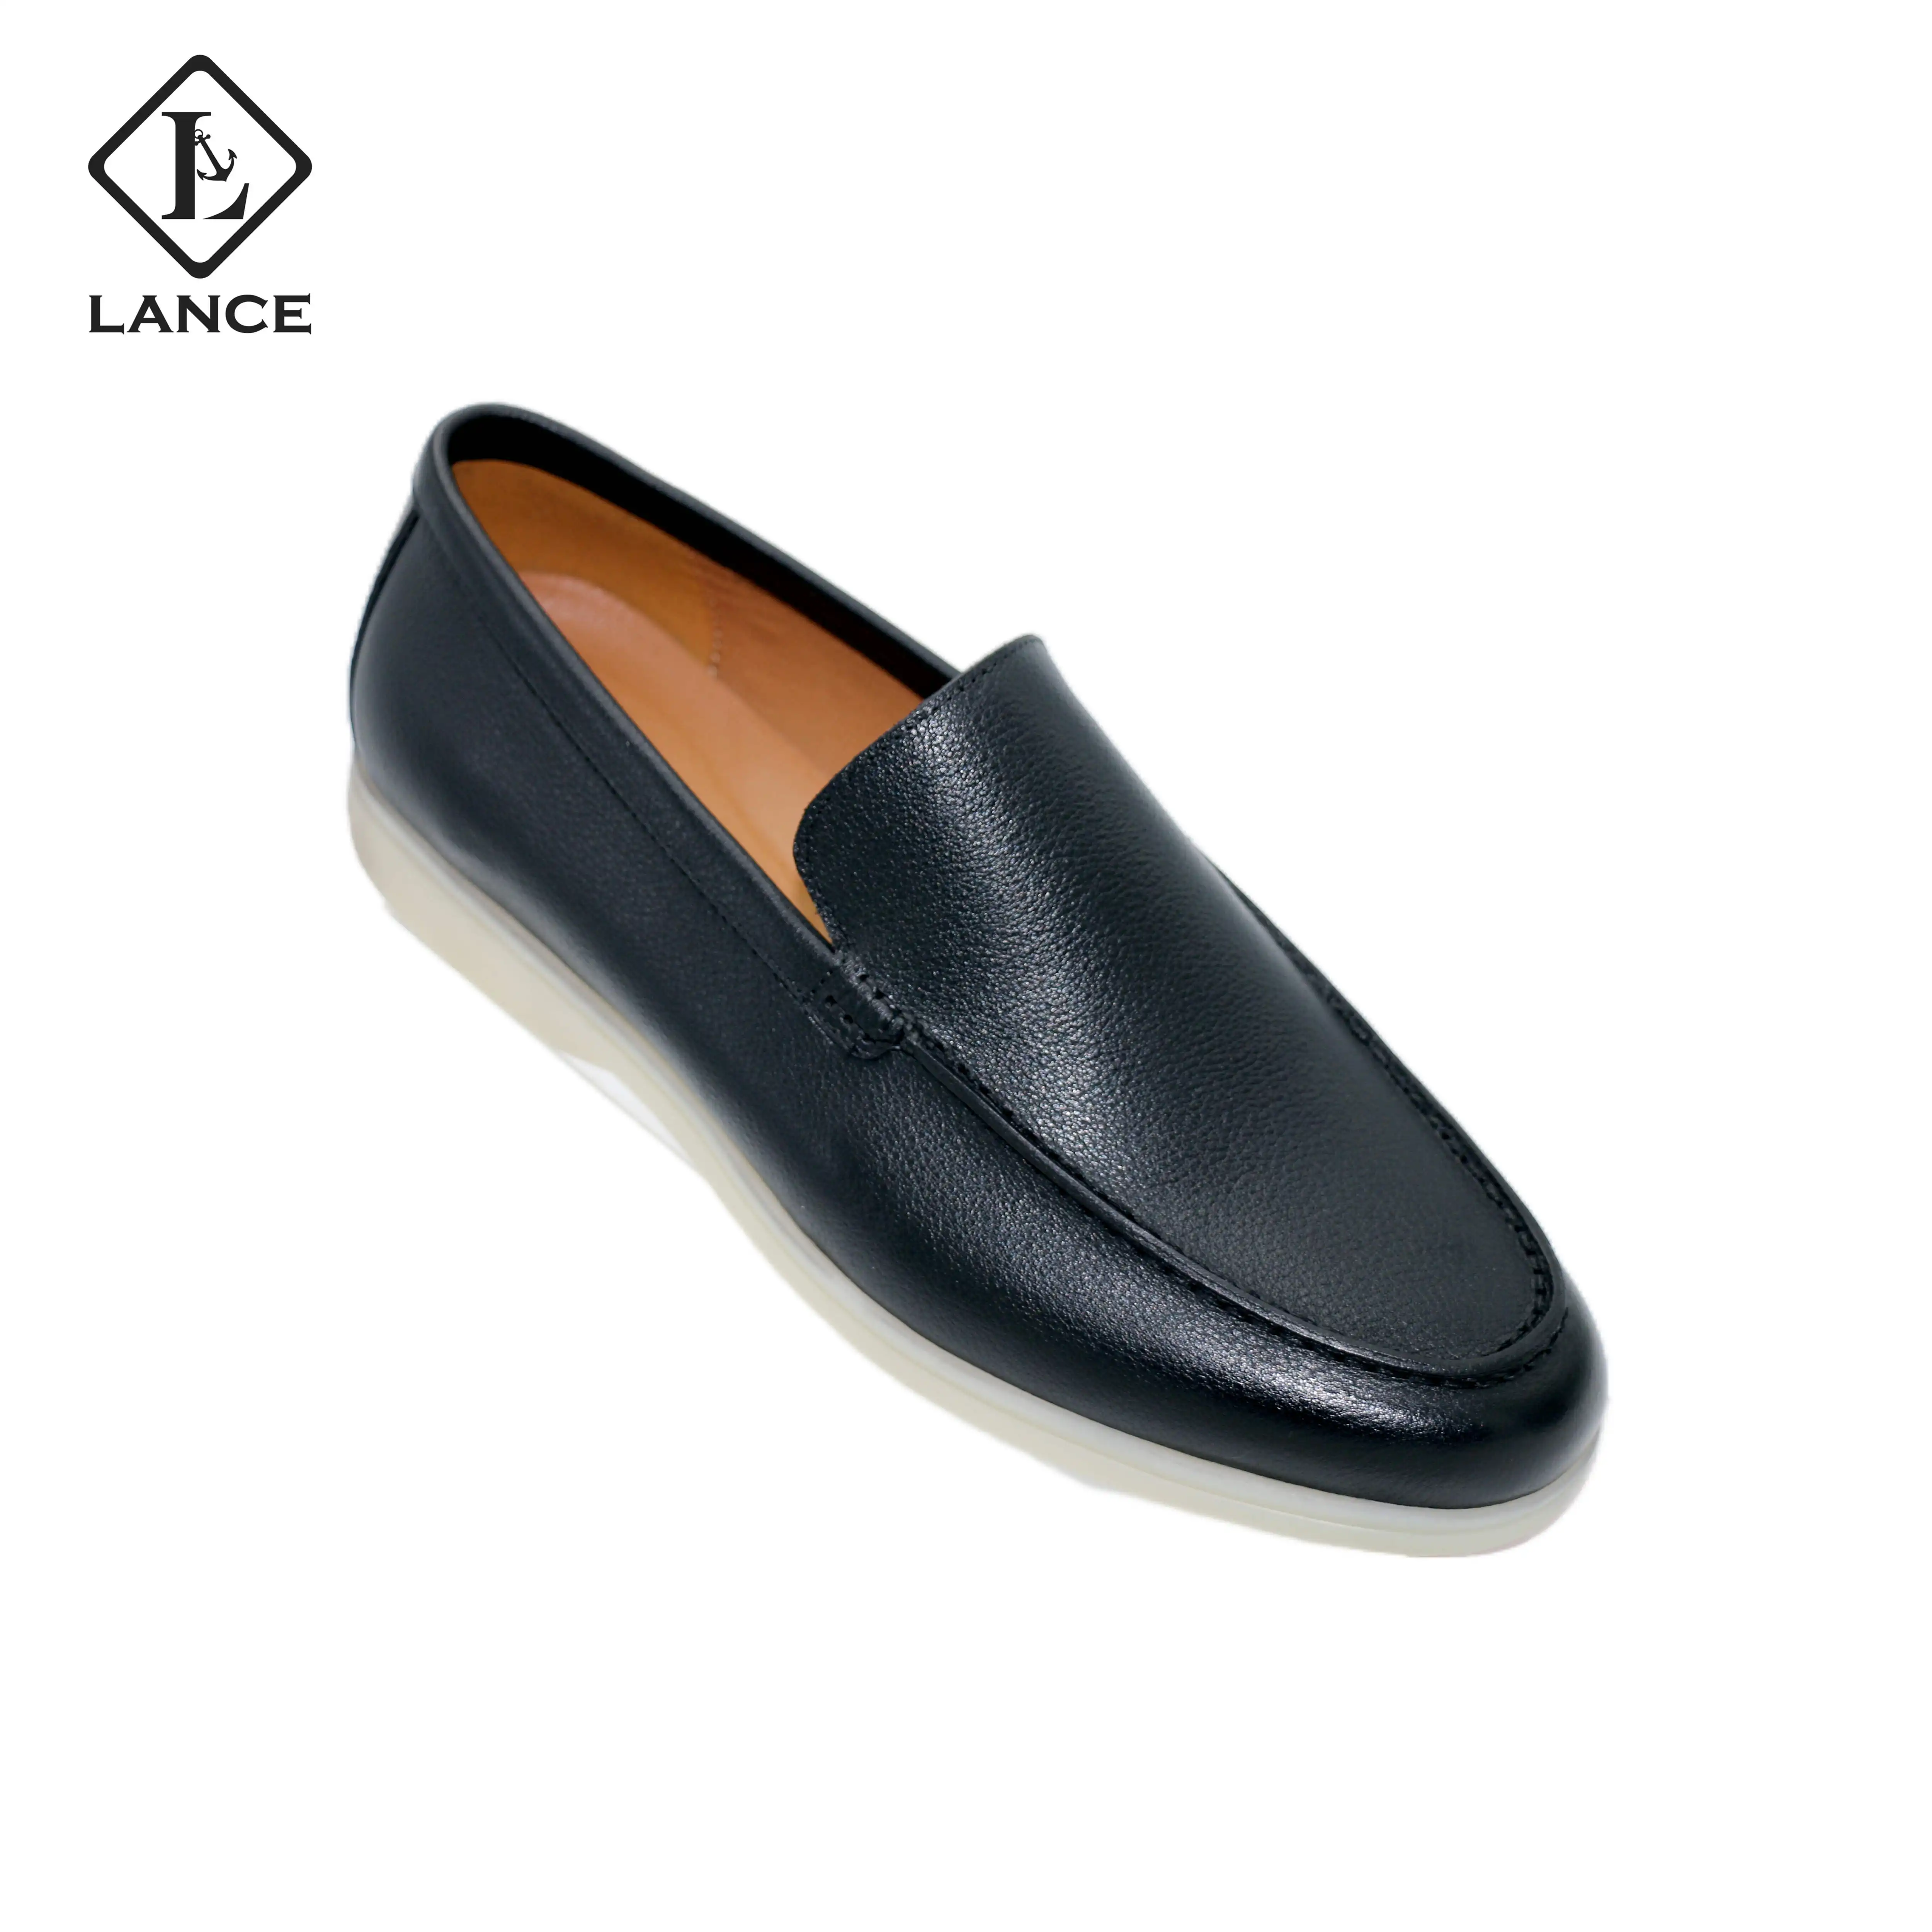 LANCI 2022 leather loafer shoe slip on dress shoe soft and Comfortable men casual shoes leather luxury